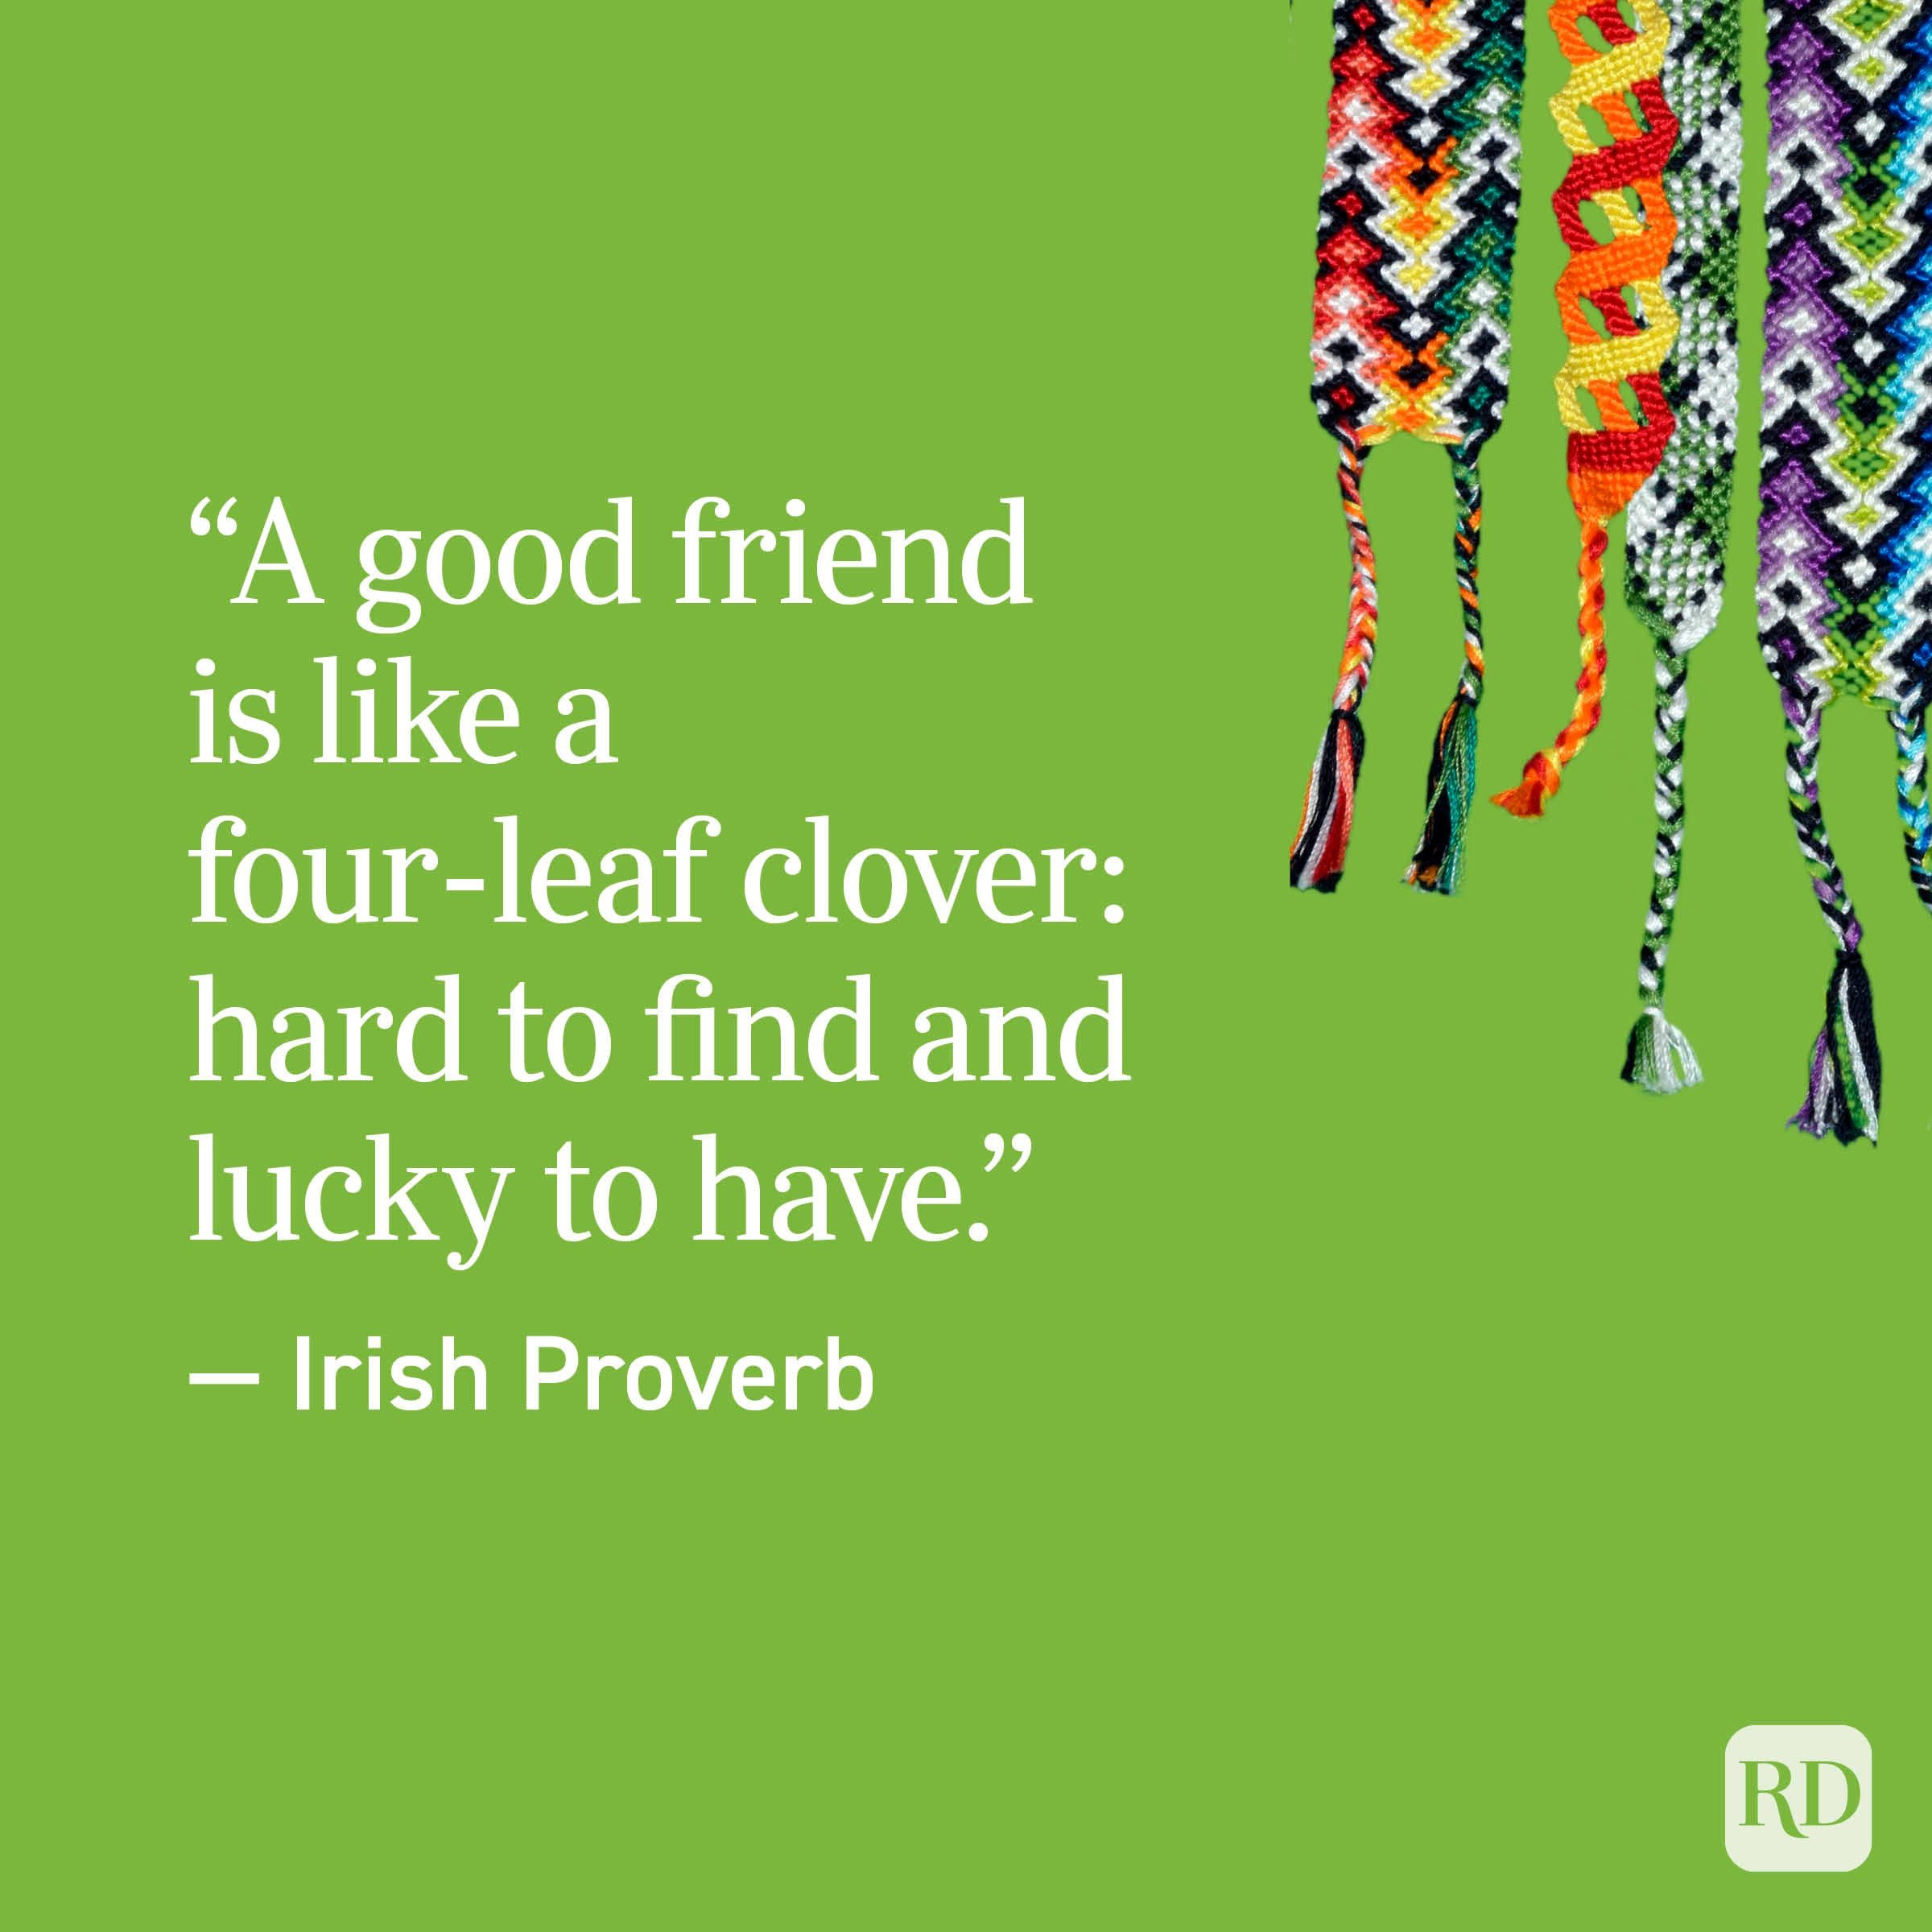 "A good friend is like a four-leaf clover: hard to find and lucky to have." - Irish Proverb